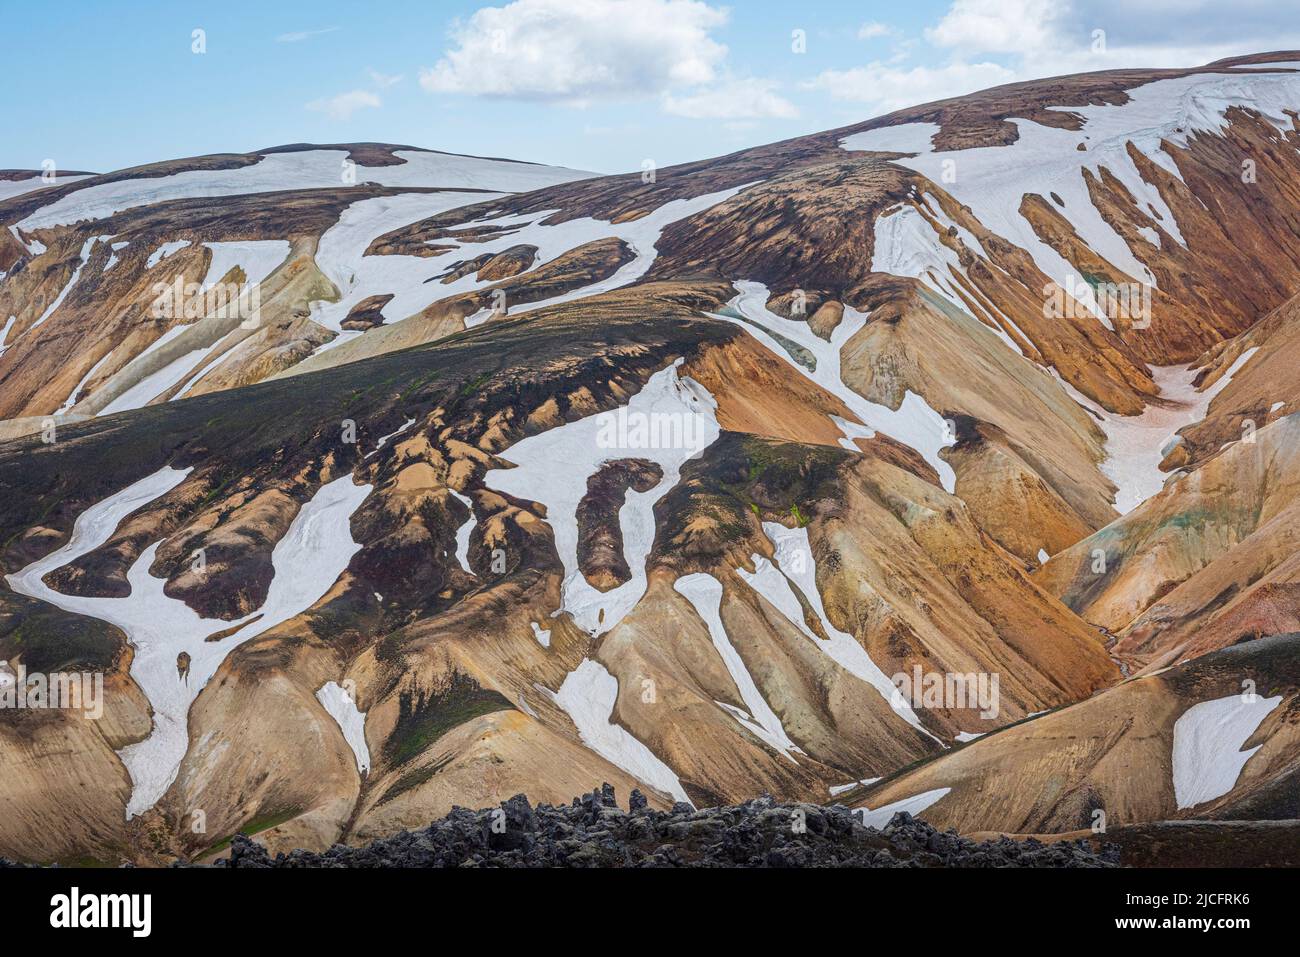 Laugavegur hiking trail is the most famous multi-day trekking tour in Iceland. Landscape shot from the area around Landmannalaugar, starting point of the long-distance hiking trail in the highlands of Iceland. Snow fields. Stock Photo